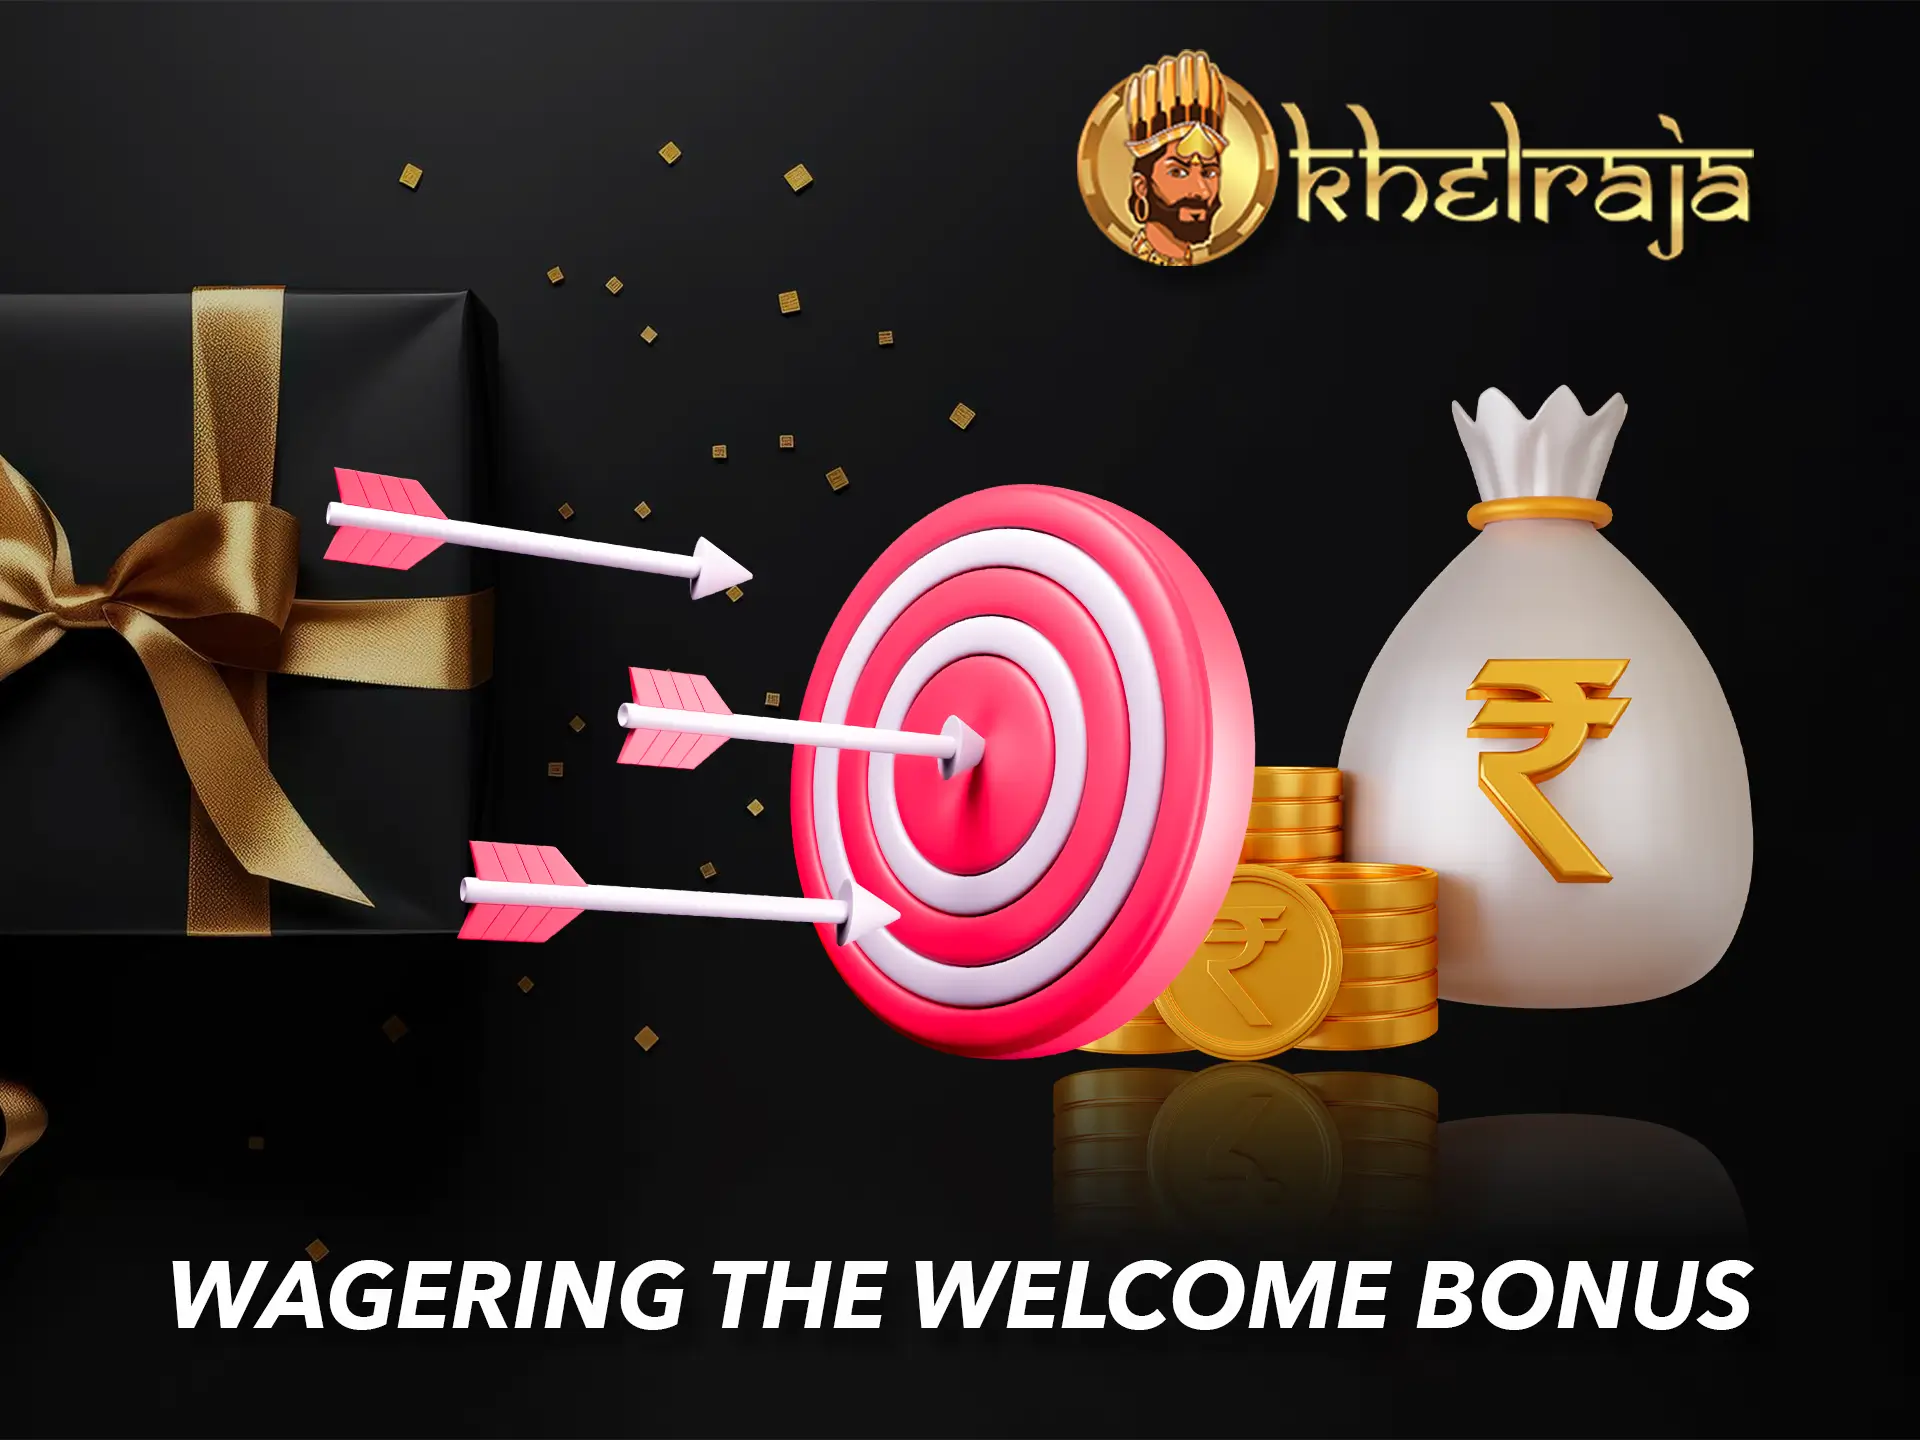 Check out the wagering rules for the Khelraja wagering bonus.